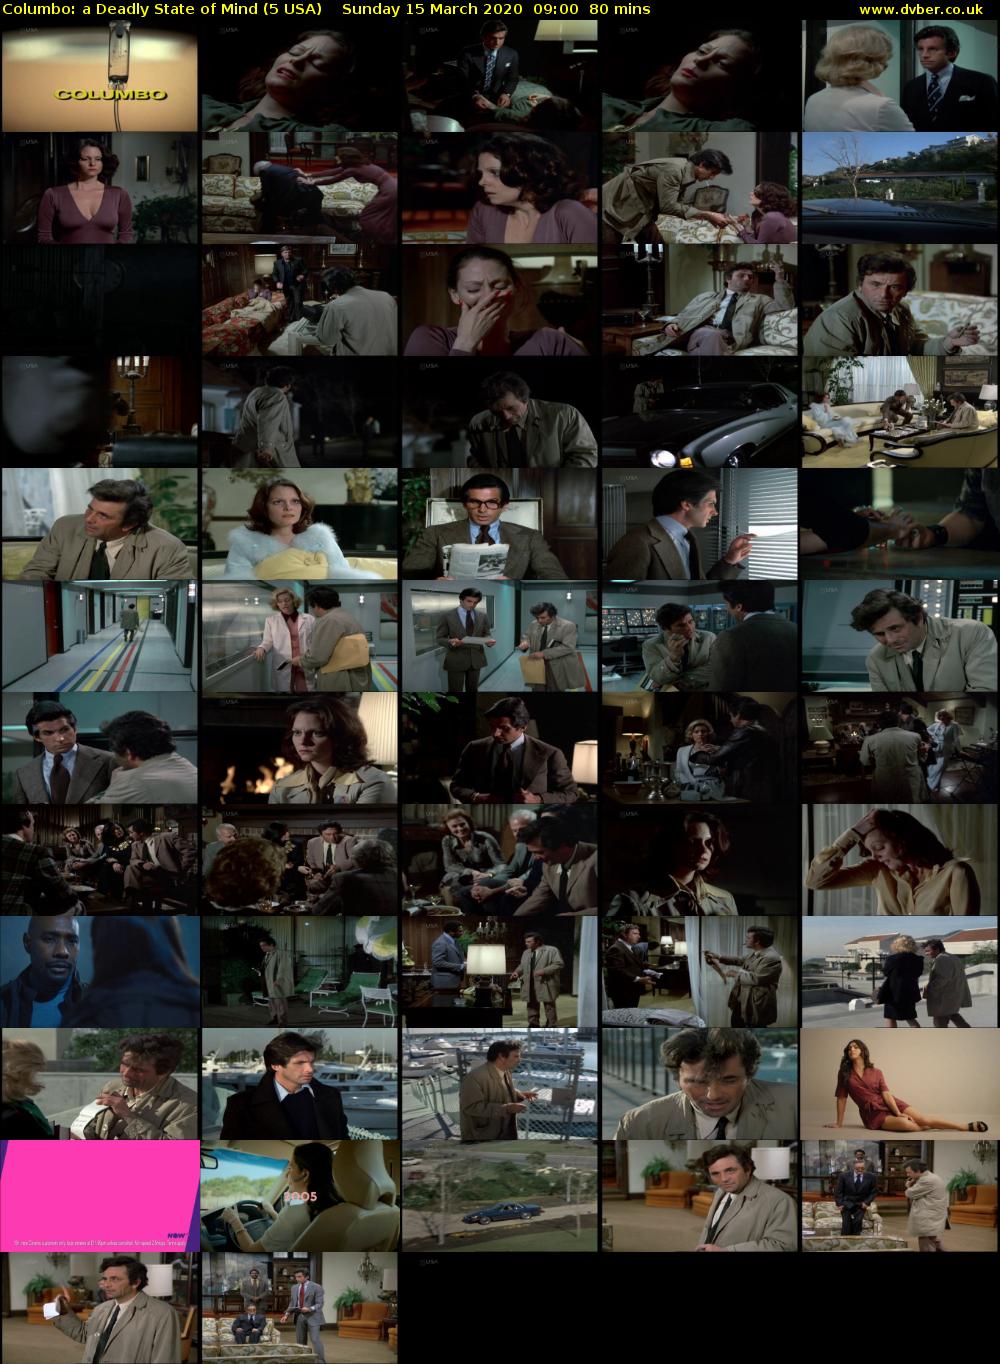 Columbo: A Deadly State of Mind (5 USA) Sunday 15 March 2020 09:00 - 10:20